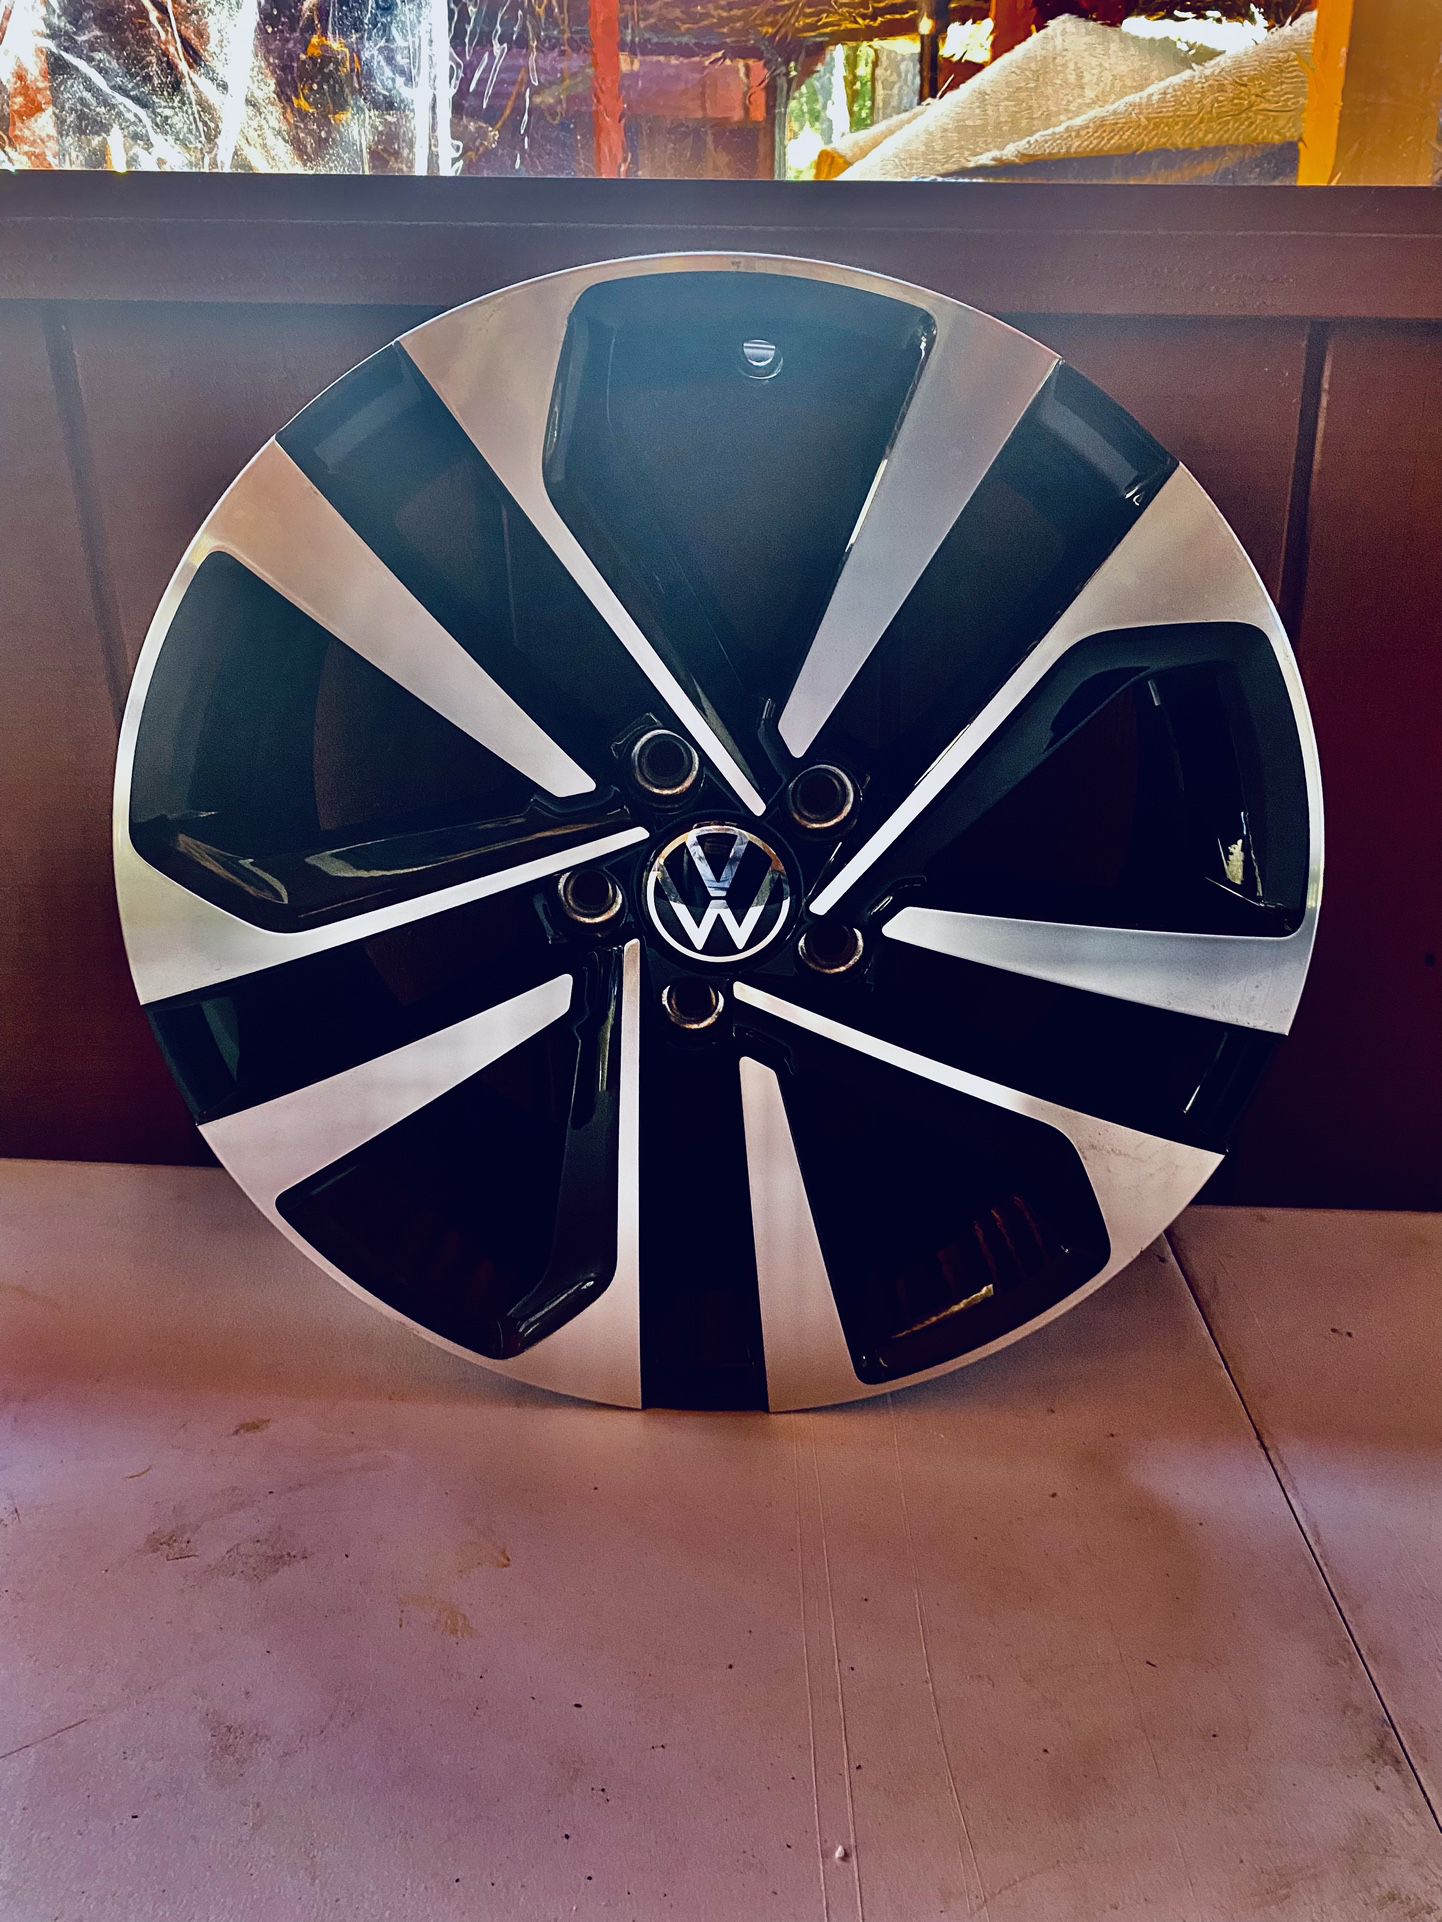 Four New 2023 17 VW Rims From 2023 BW Tiguan 